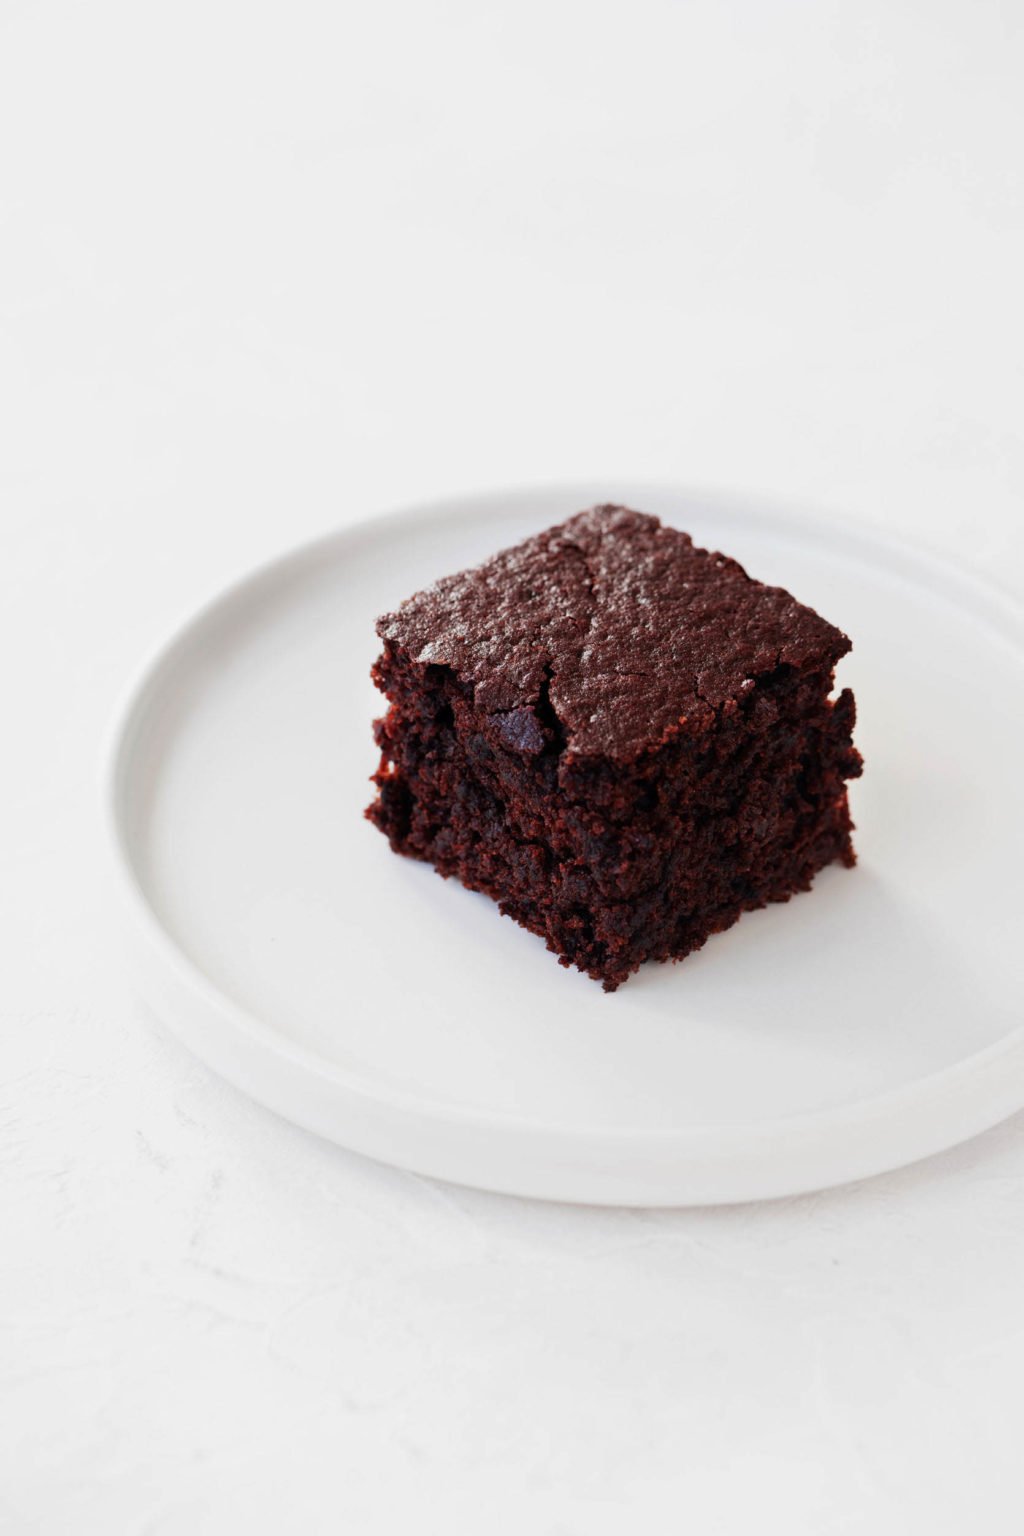 A small piece of plant-based, chocolate dessert rests on a white, round dessert plate.